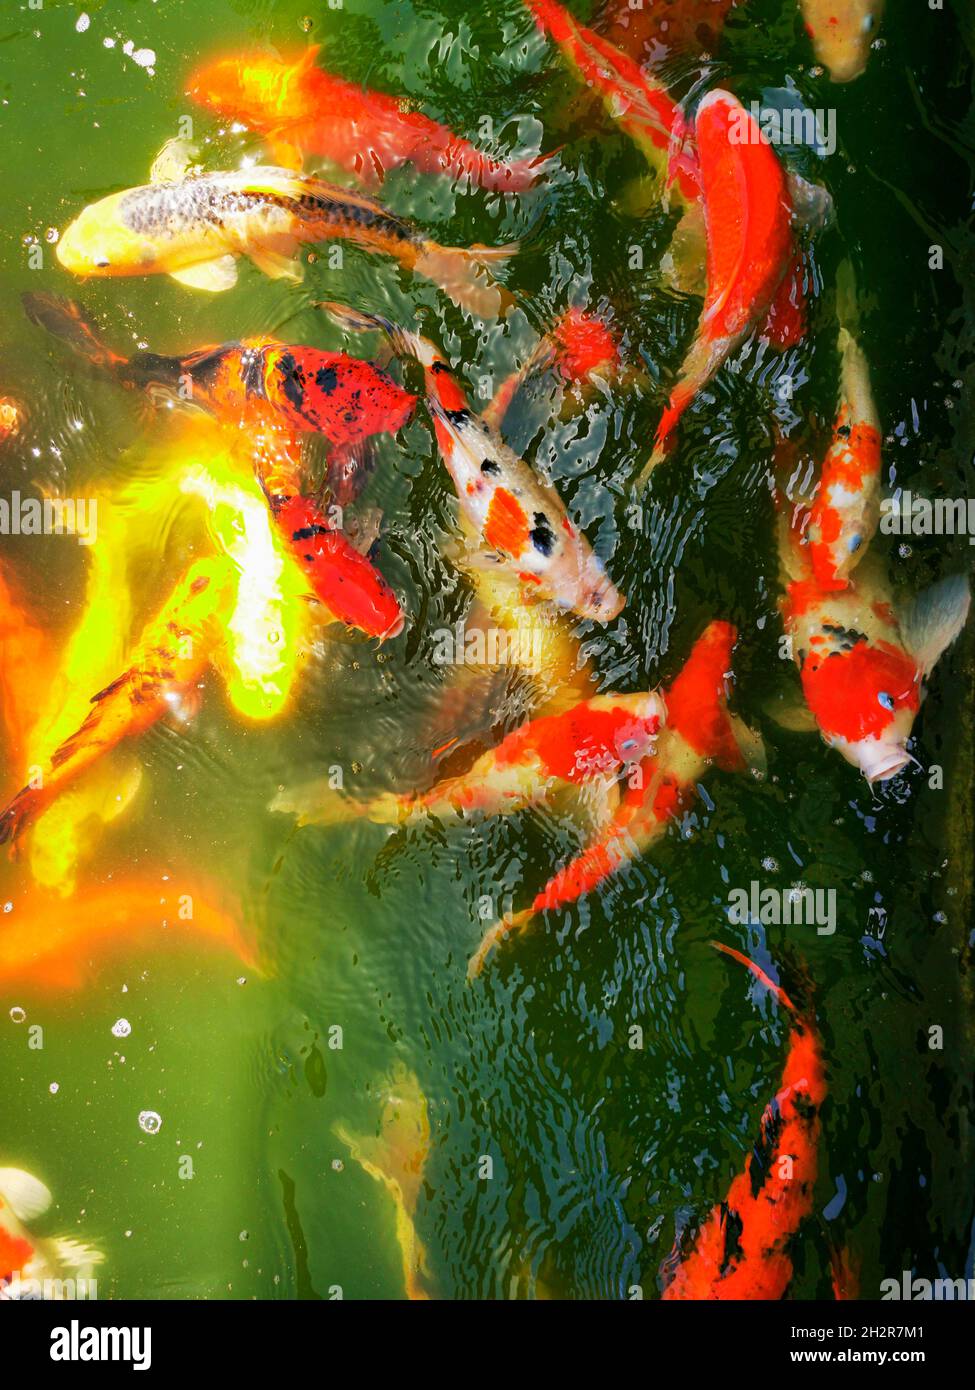 Top view of Koi fish or carp fish in the water on a sunny day Stock Photo -  Alamy